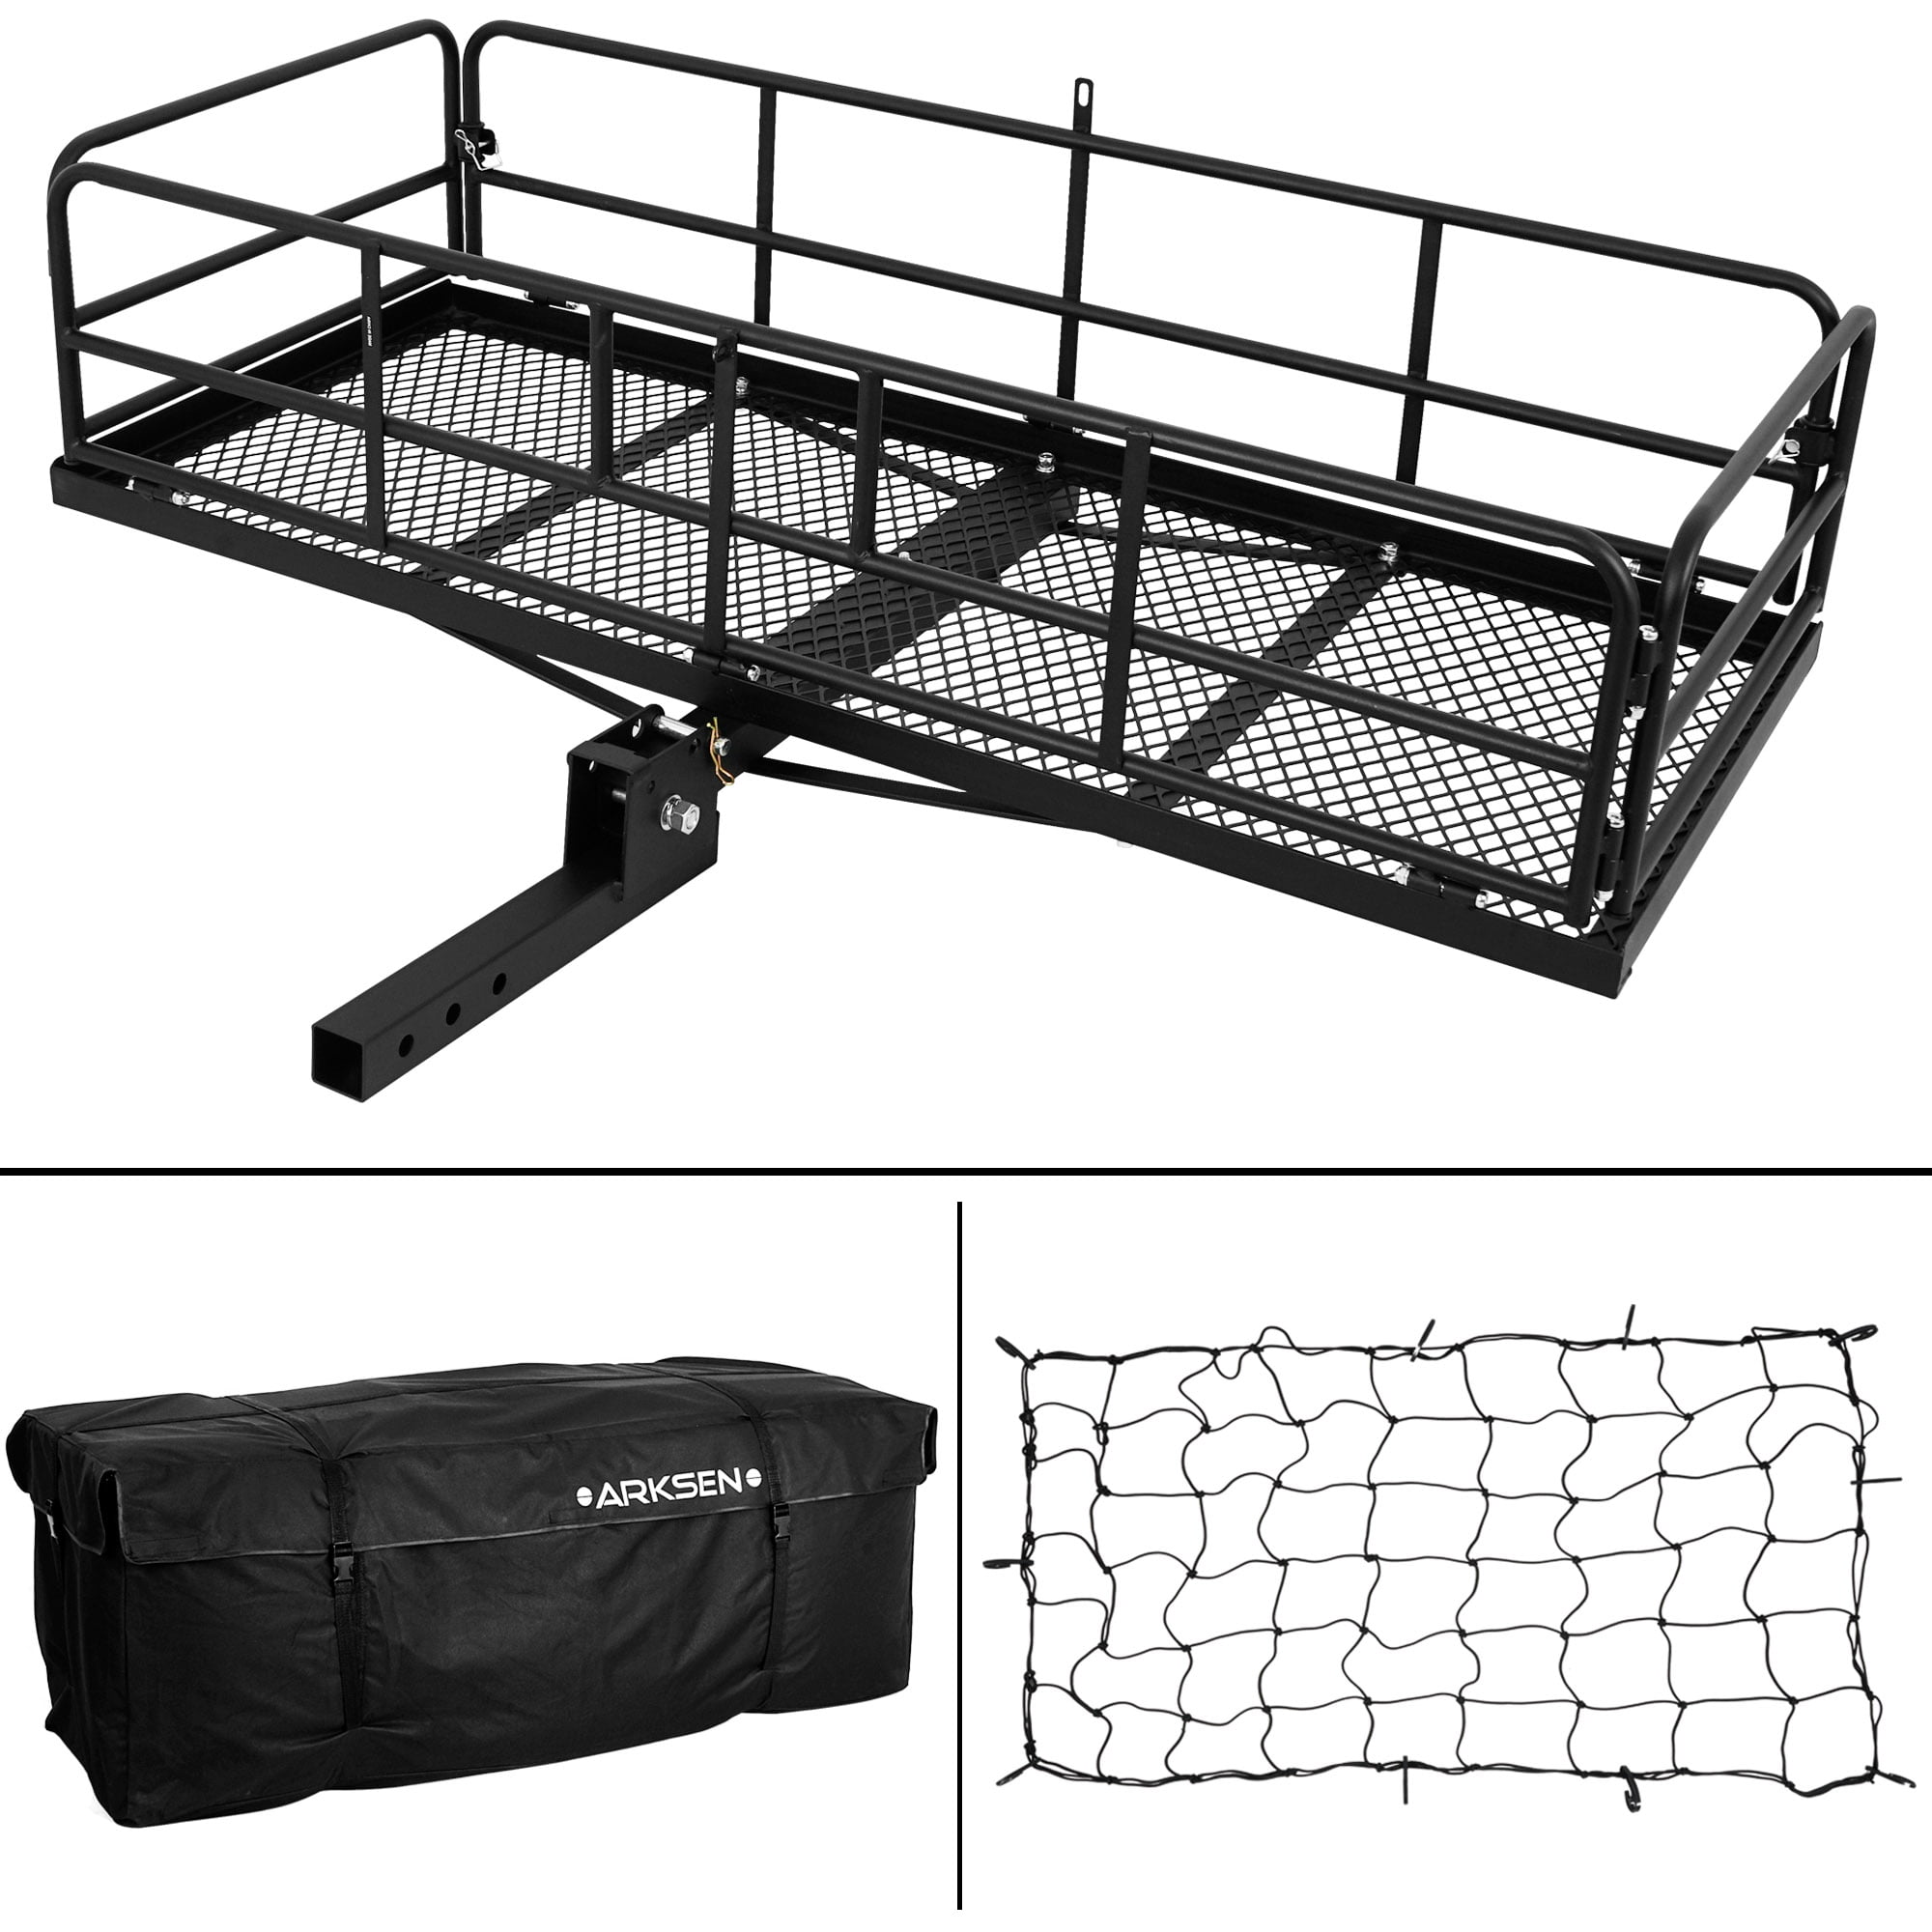 ARKSEN Foldable 60x 24x 14 Luggage Basket With Cargo Bag & Nylon Net Combo Trailer Hitch Carrier Fit 2 Receiver Camping RV SUV 